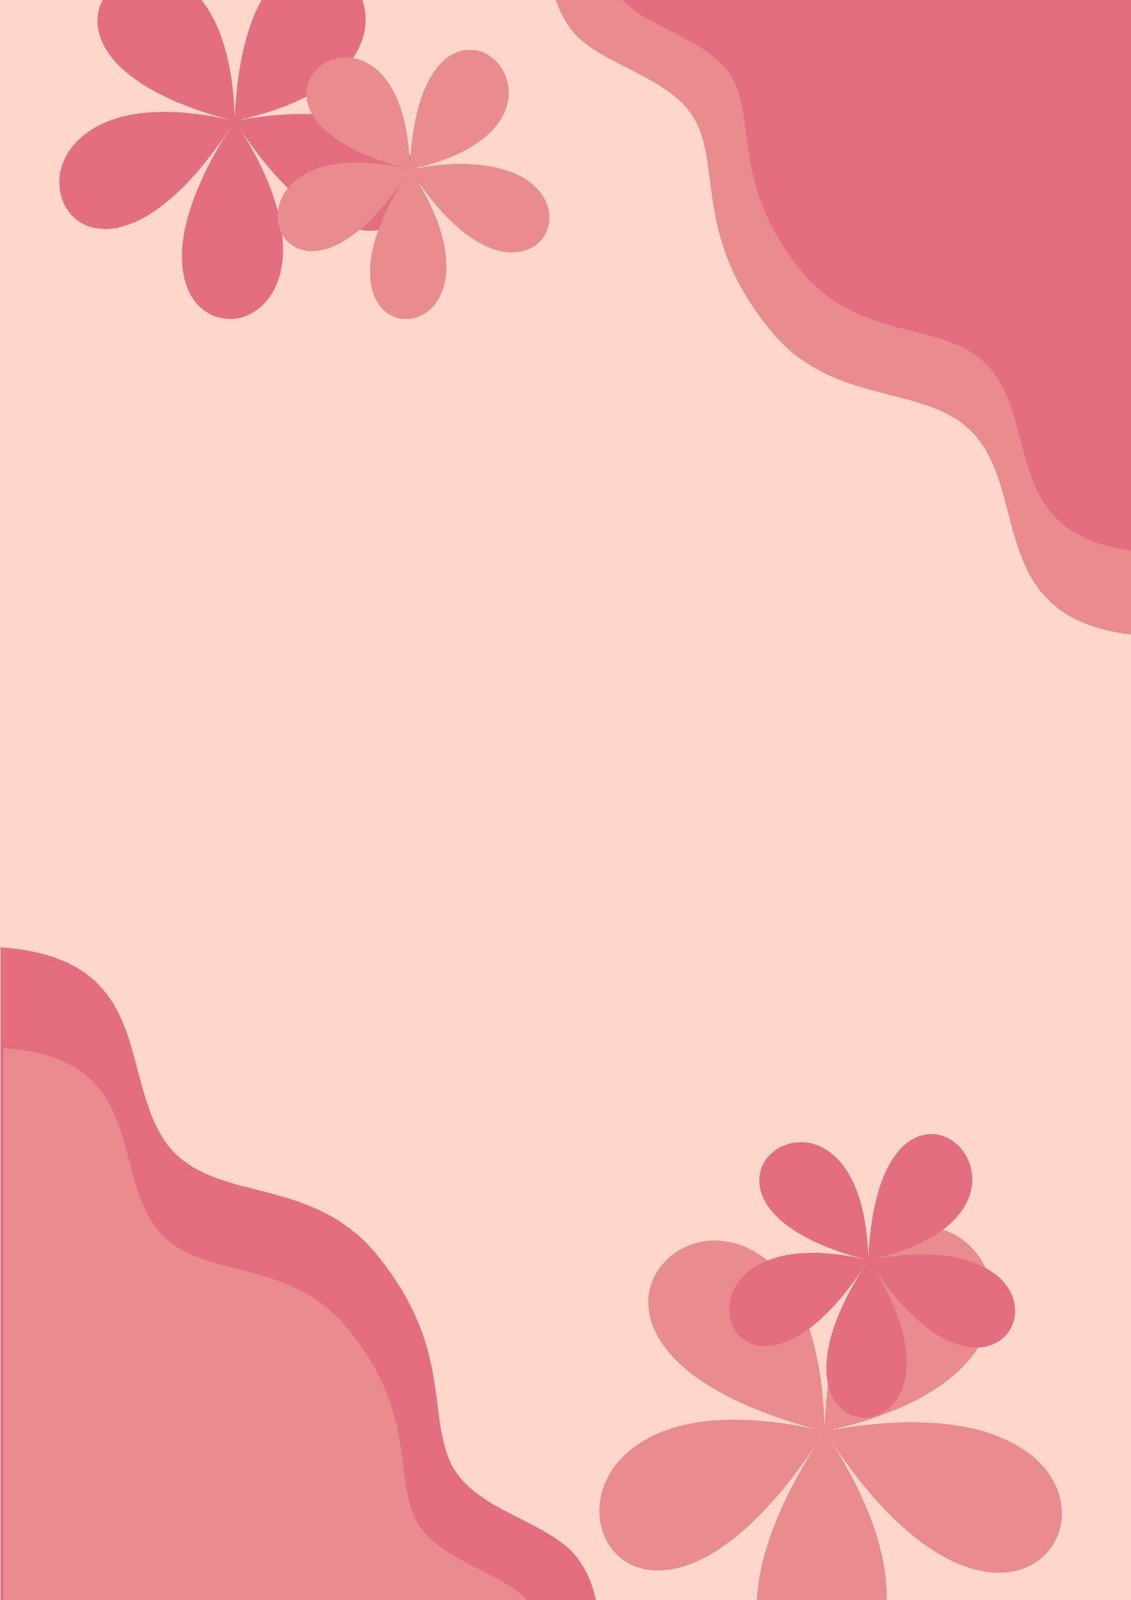 Page 2 - Free and customizable pink background templates